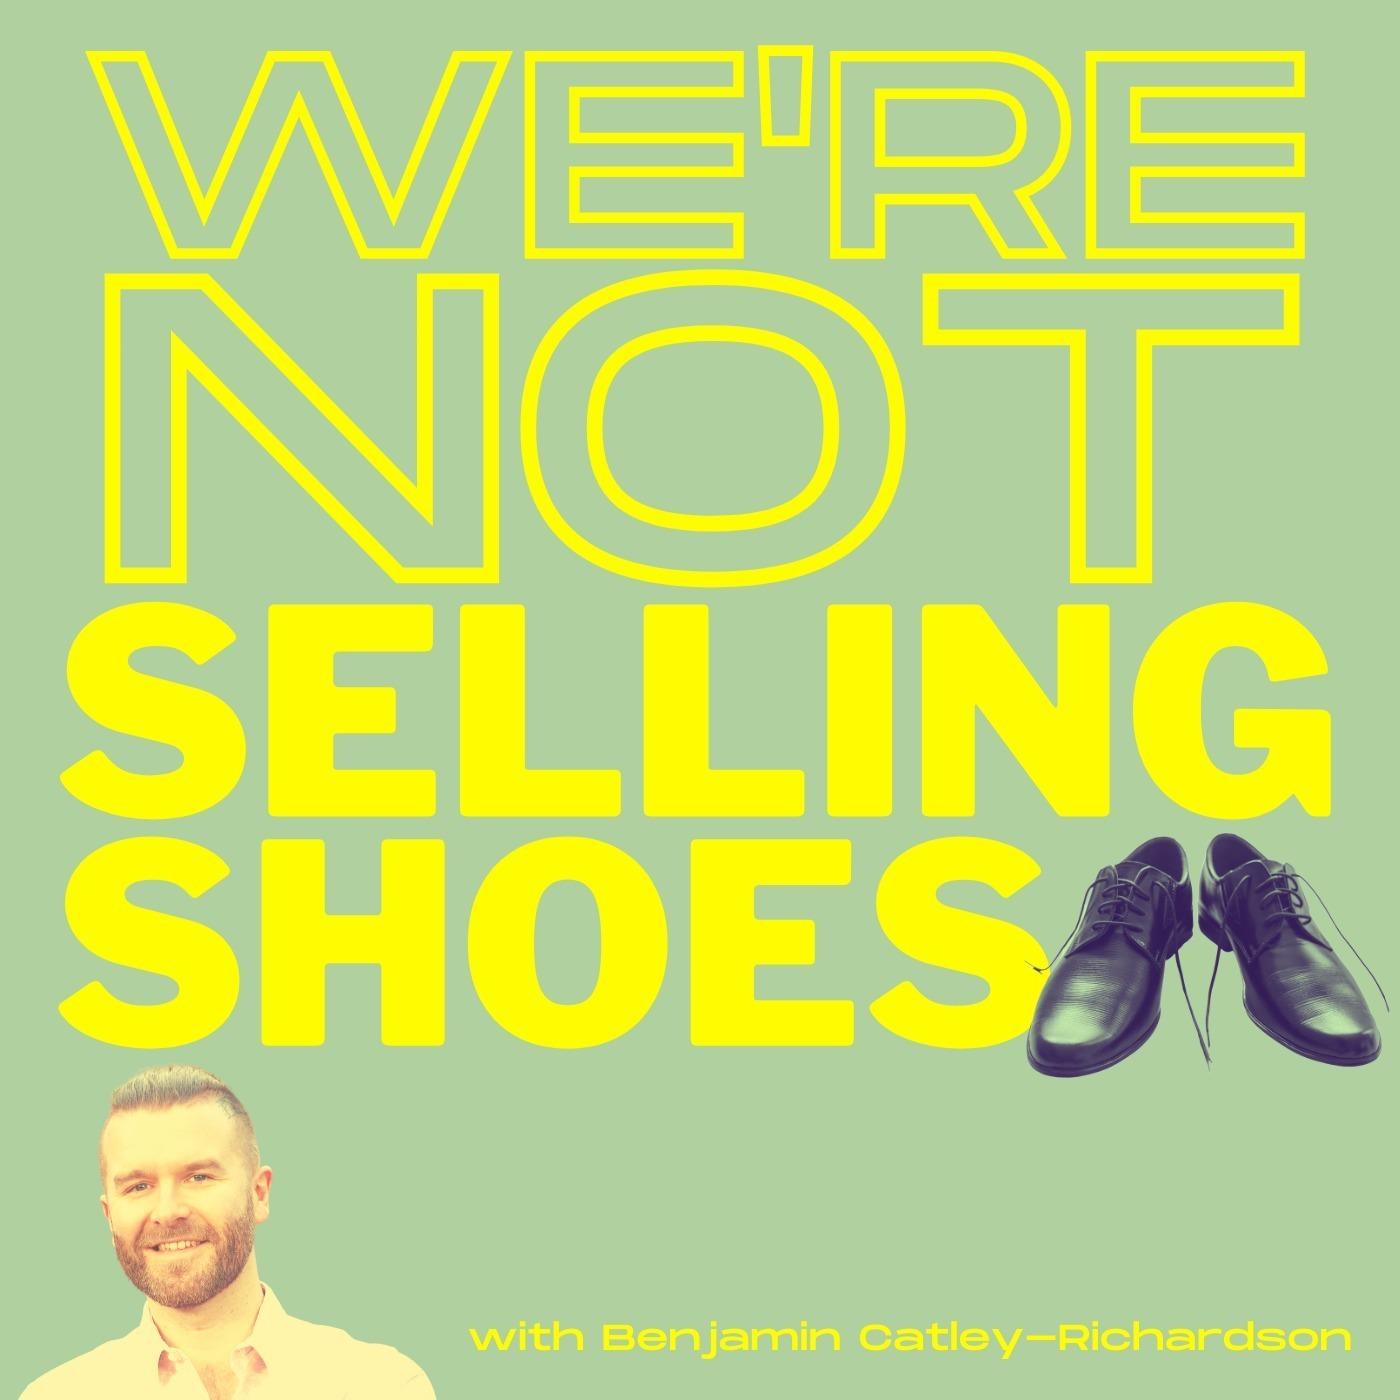 We're Not Selling Shoes